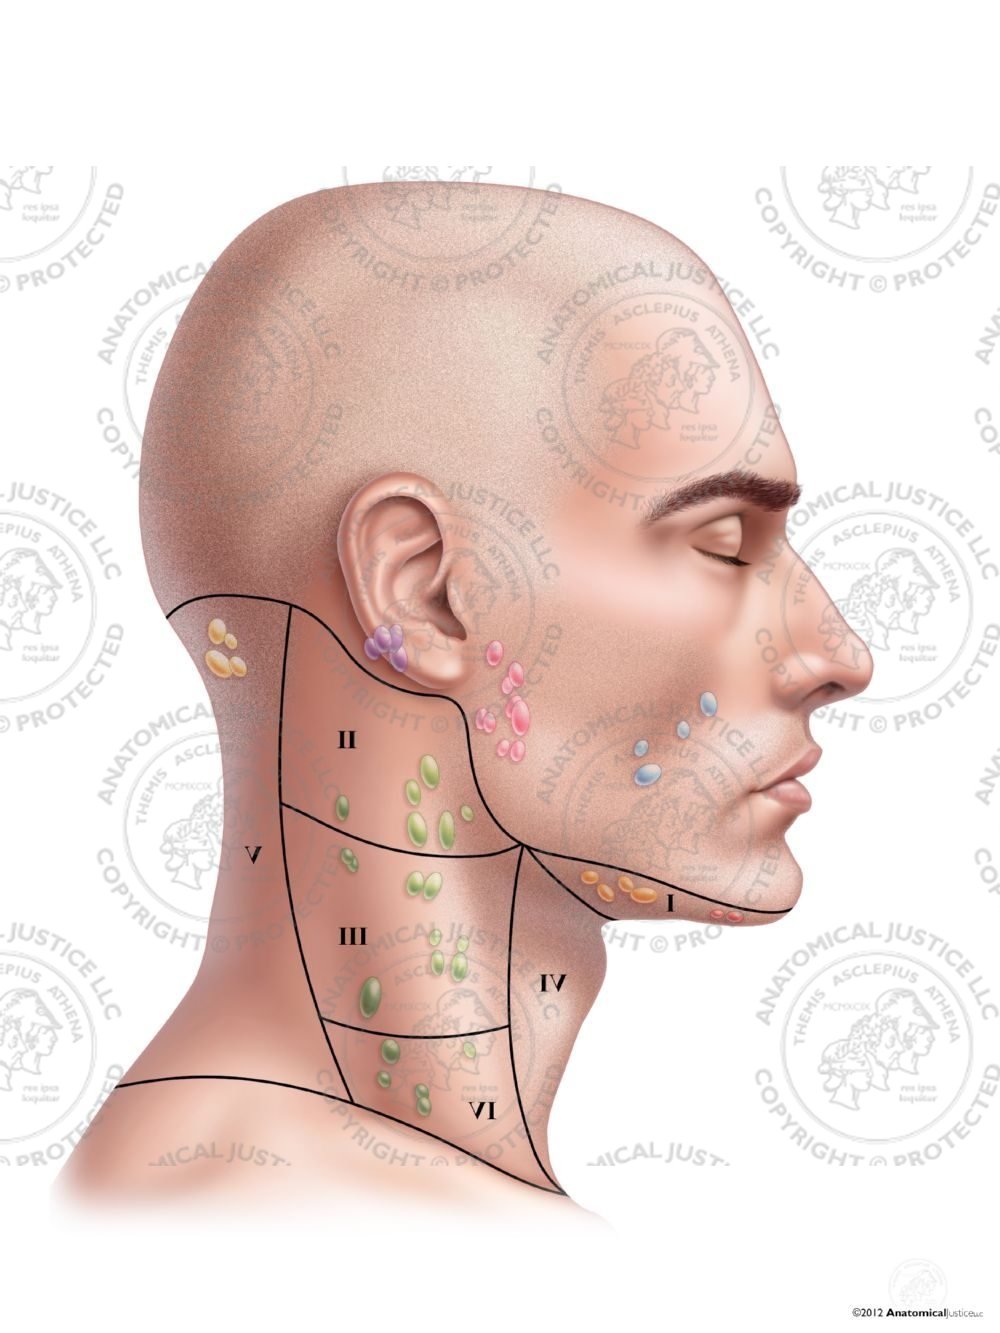 Male Right Lymph Nodes and Regions of the Neck – No Text